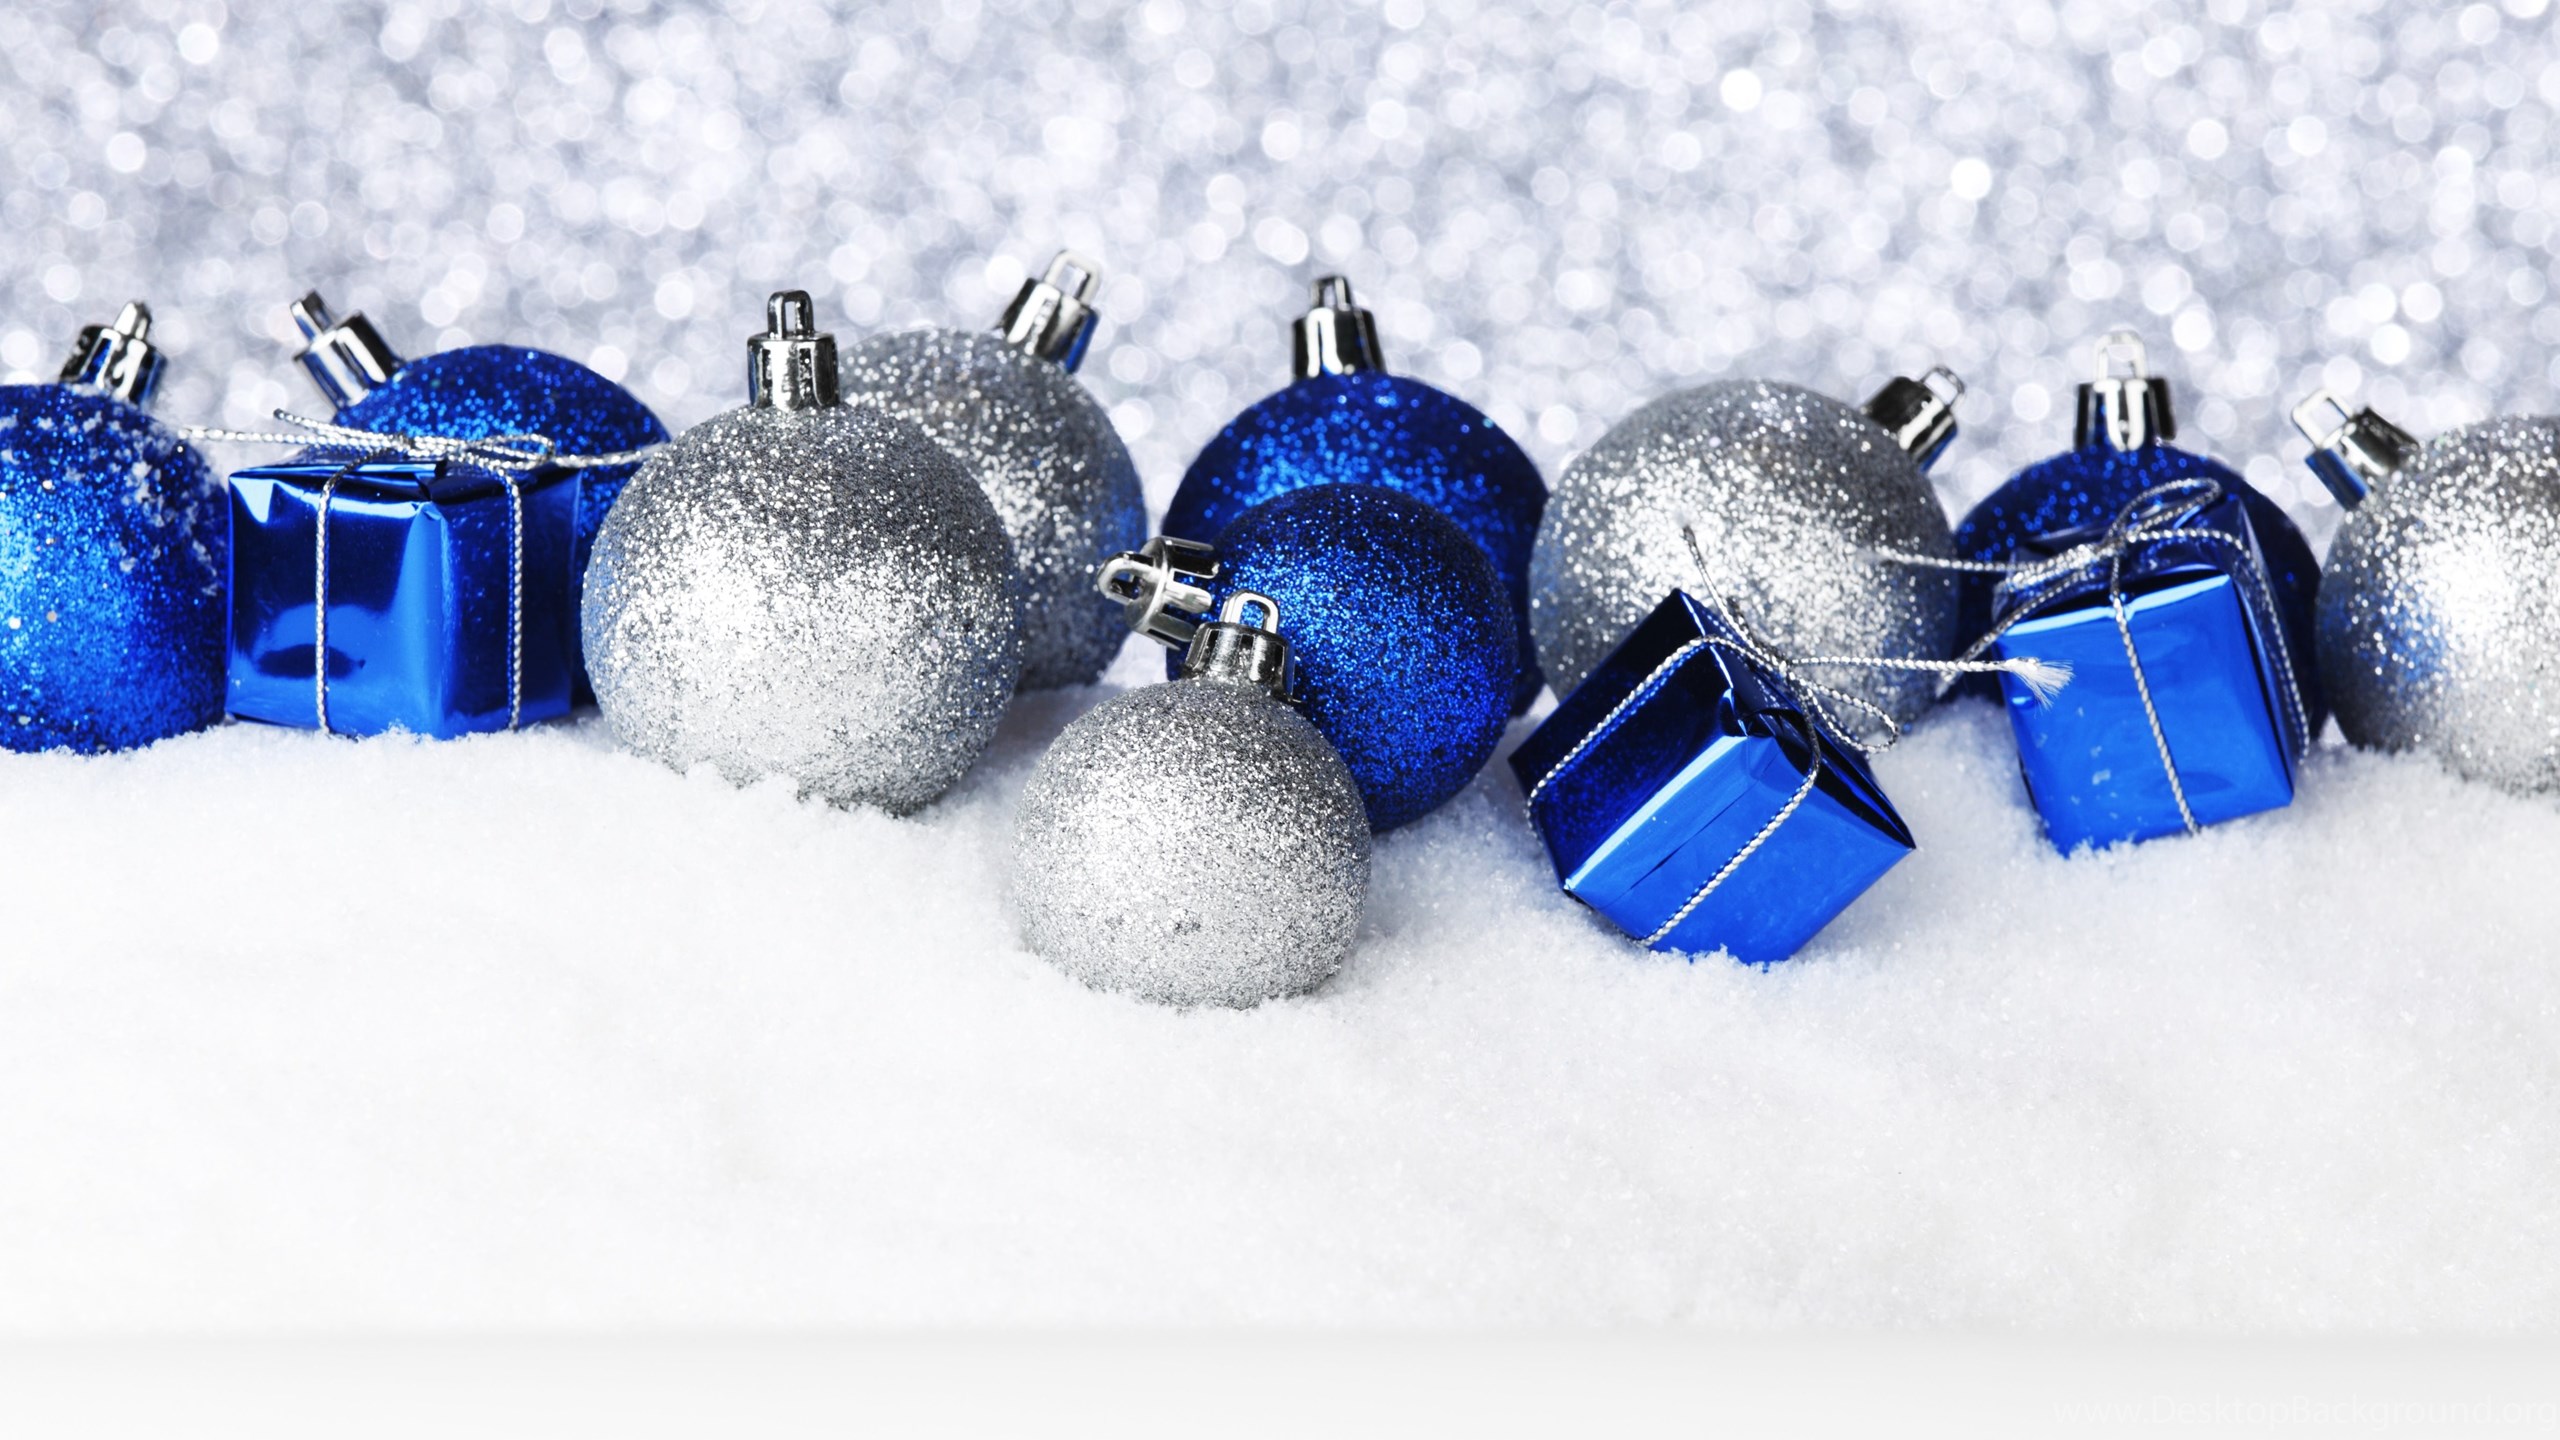 Download 900x599px Widescreen Wallpapers Of Blue Christmas 186.35 KB Popula...